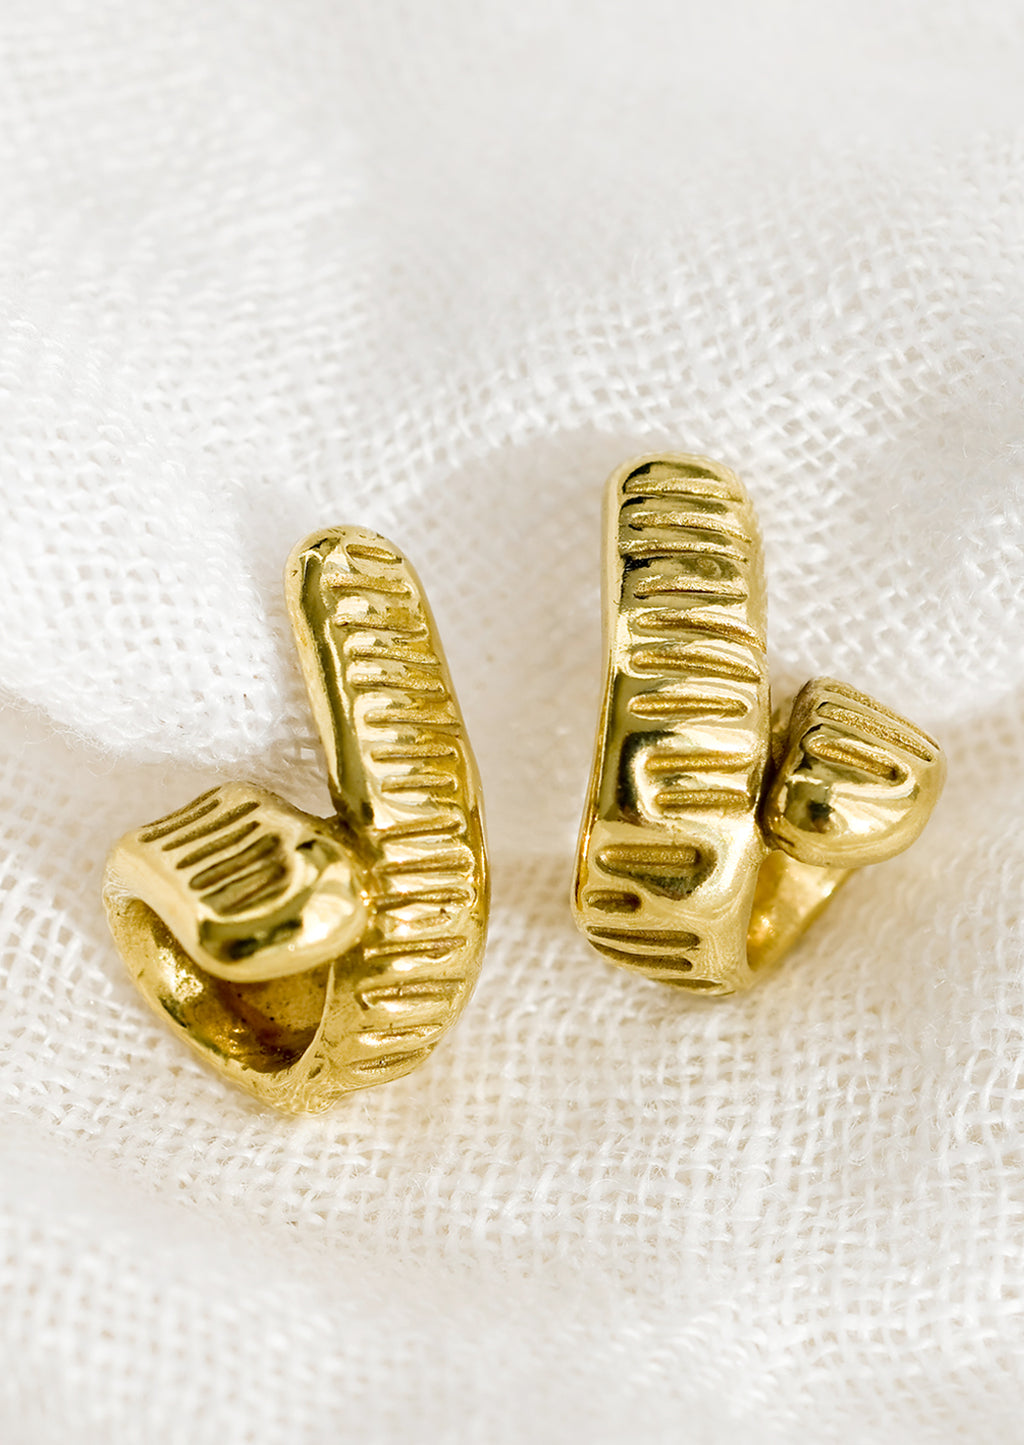 1: A pair of brass earrings with curled shape and line etched texture.